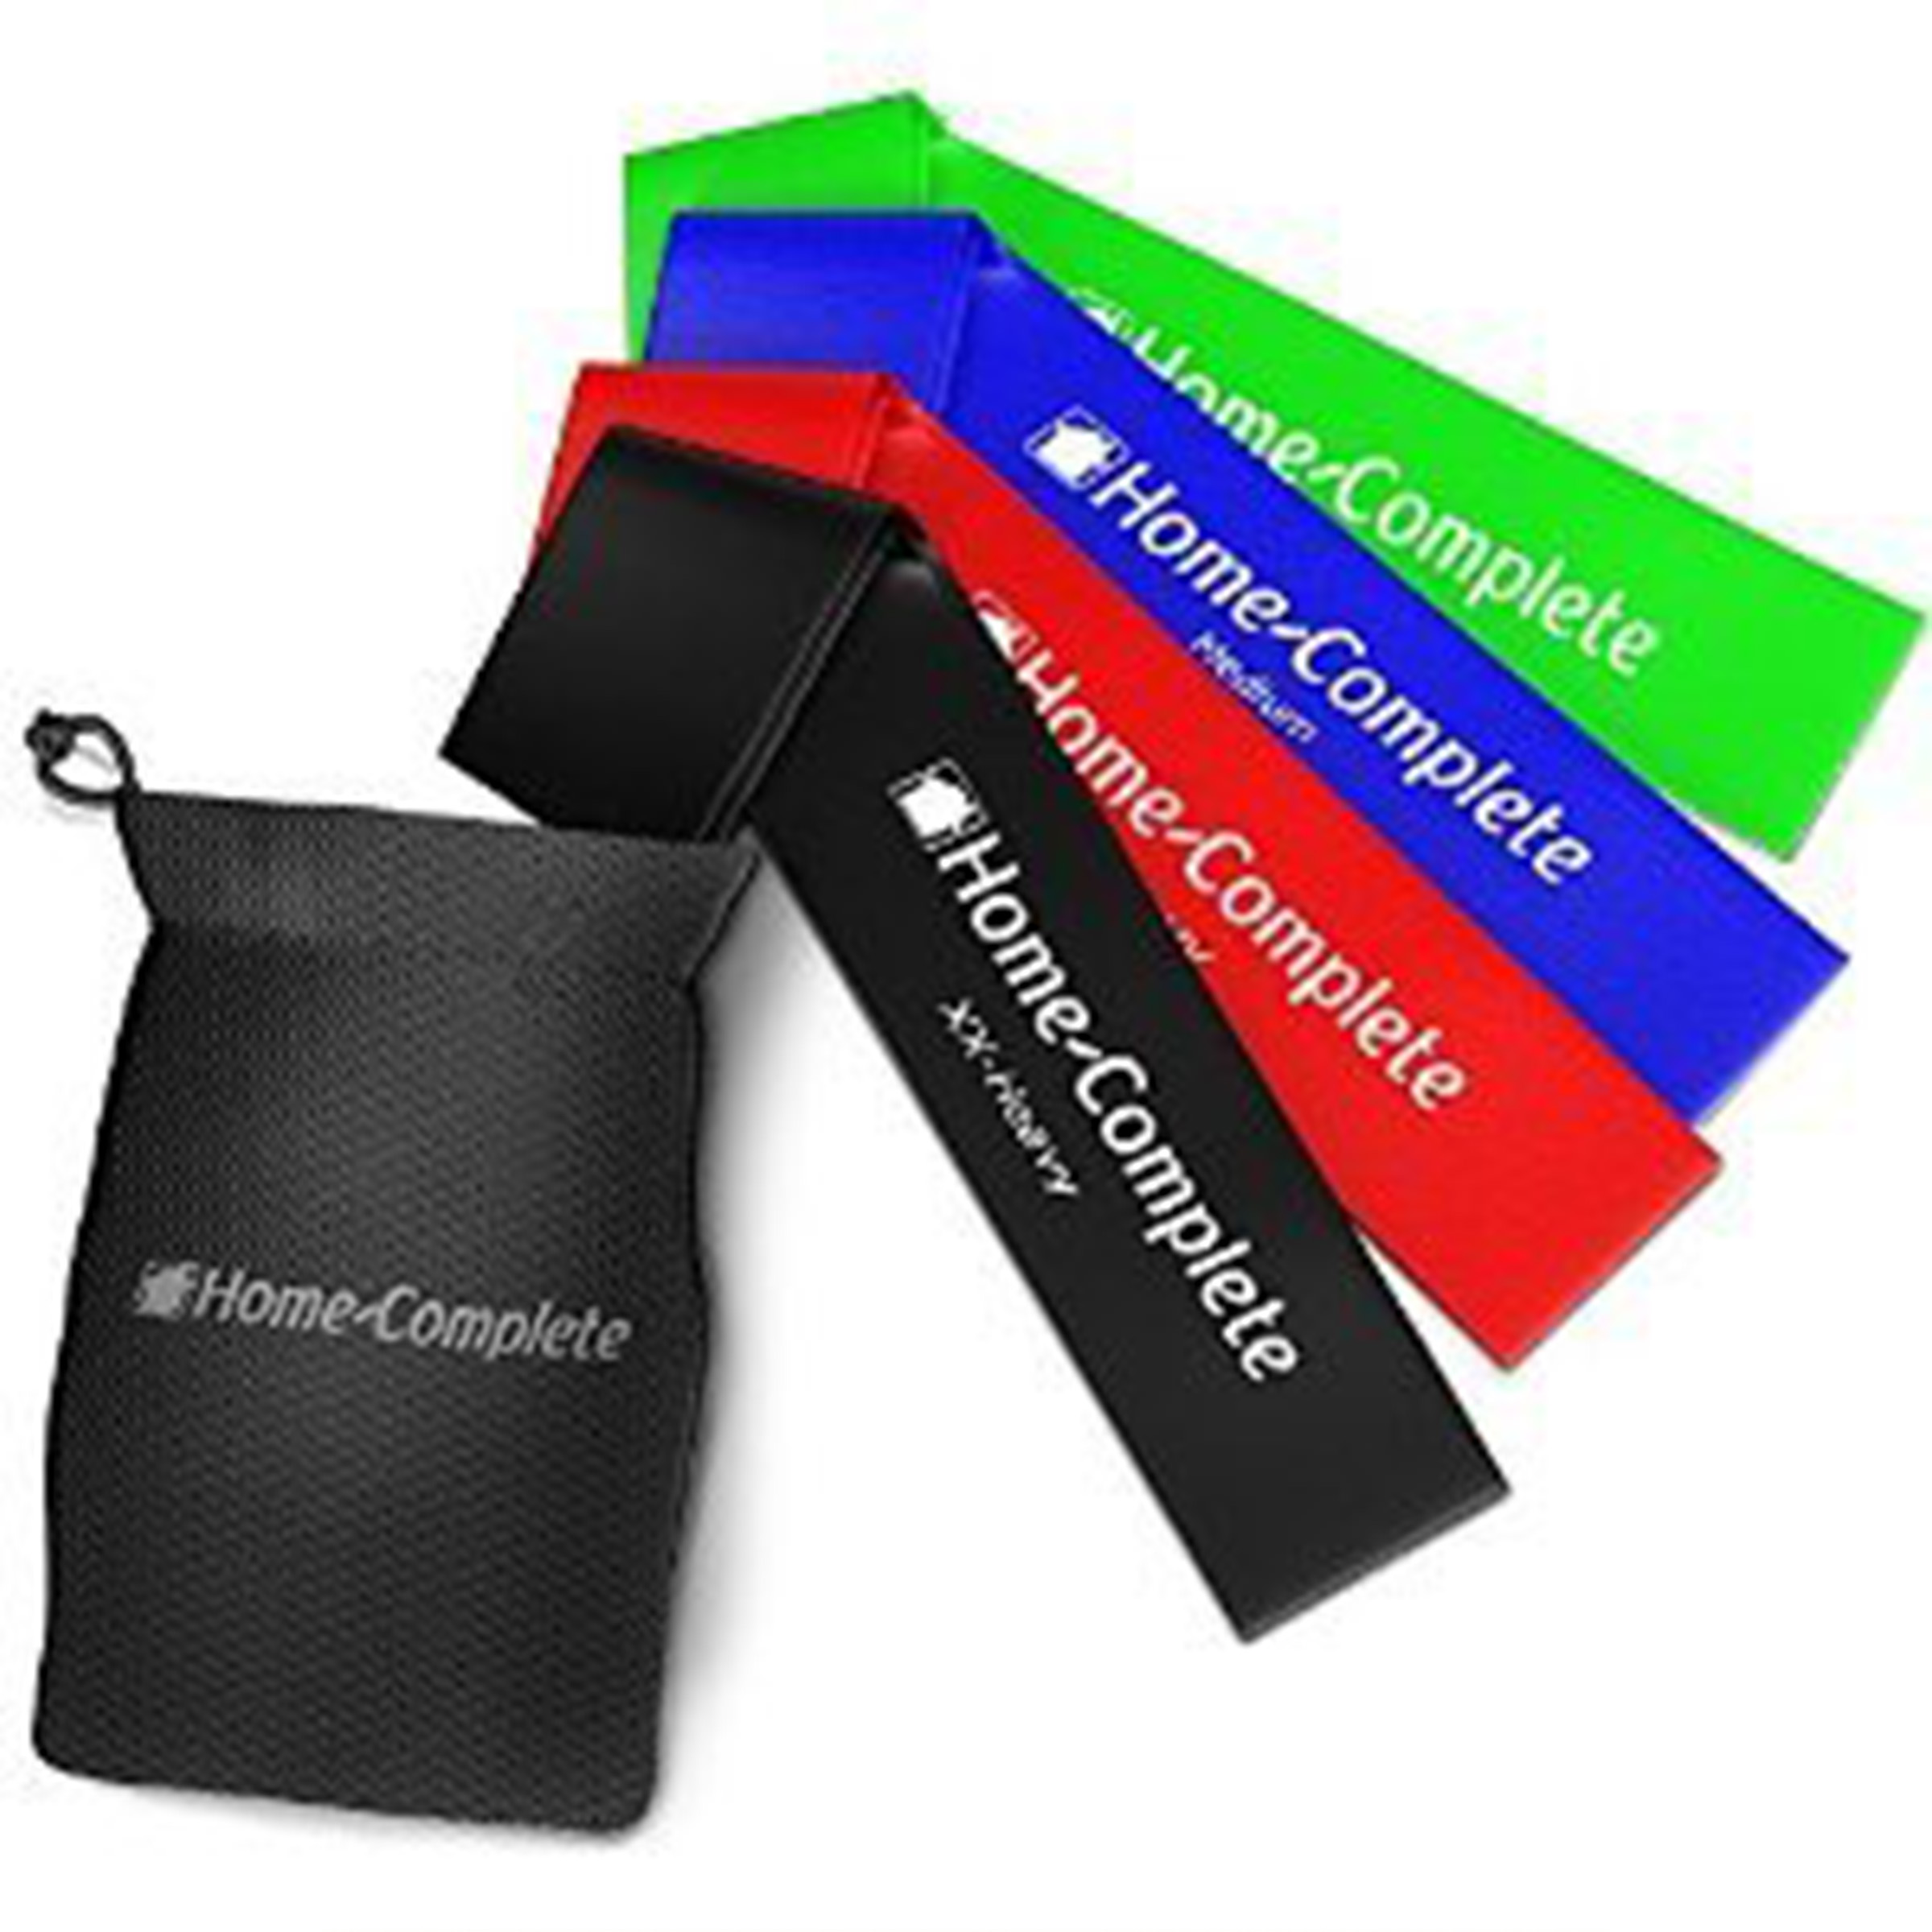 Home-Complete Resistance Bands Exercise Bands Loops- Set of 4 - image 3 of 6